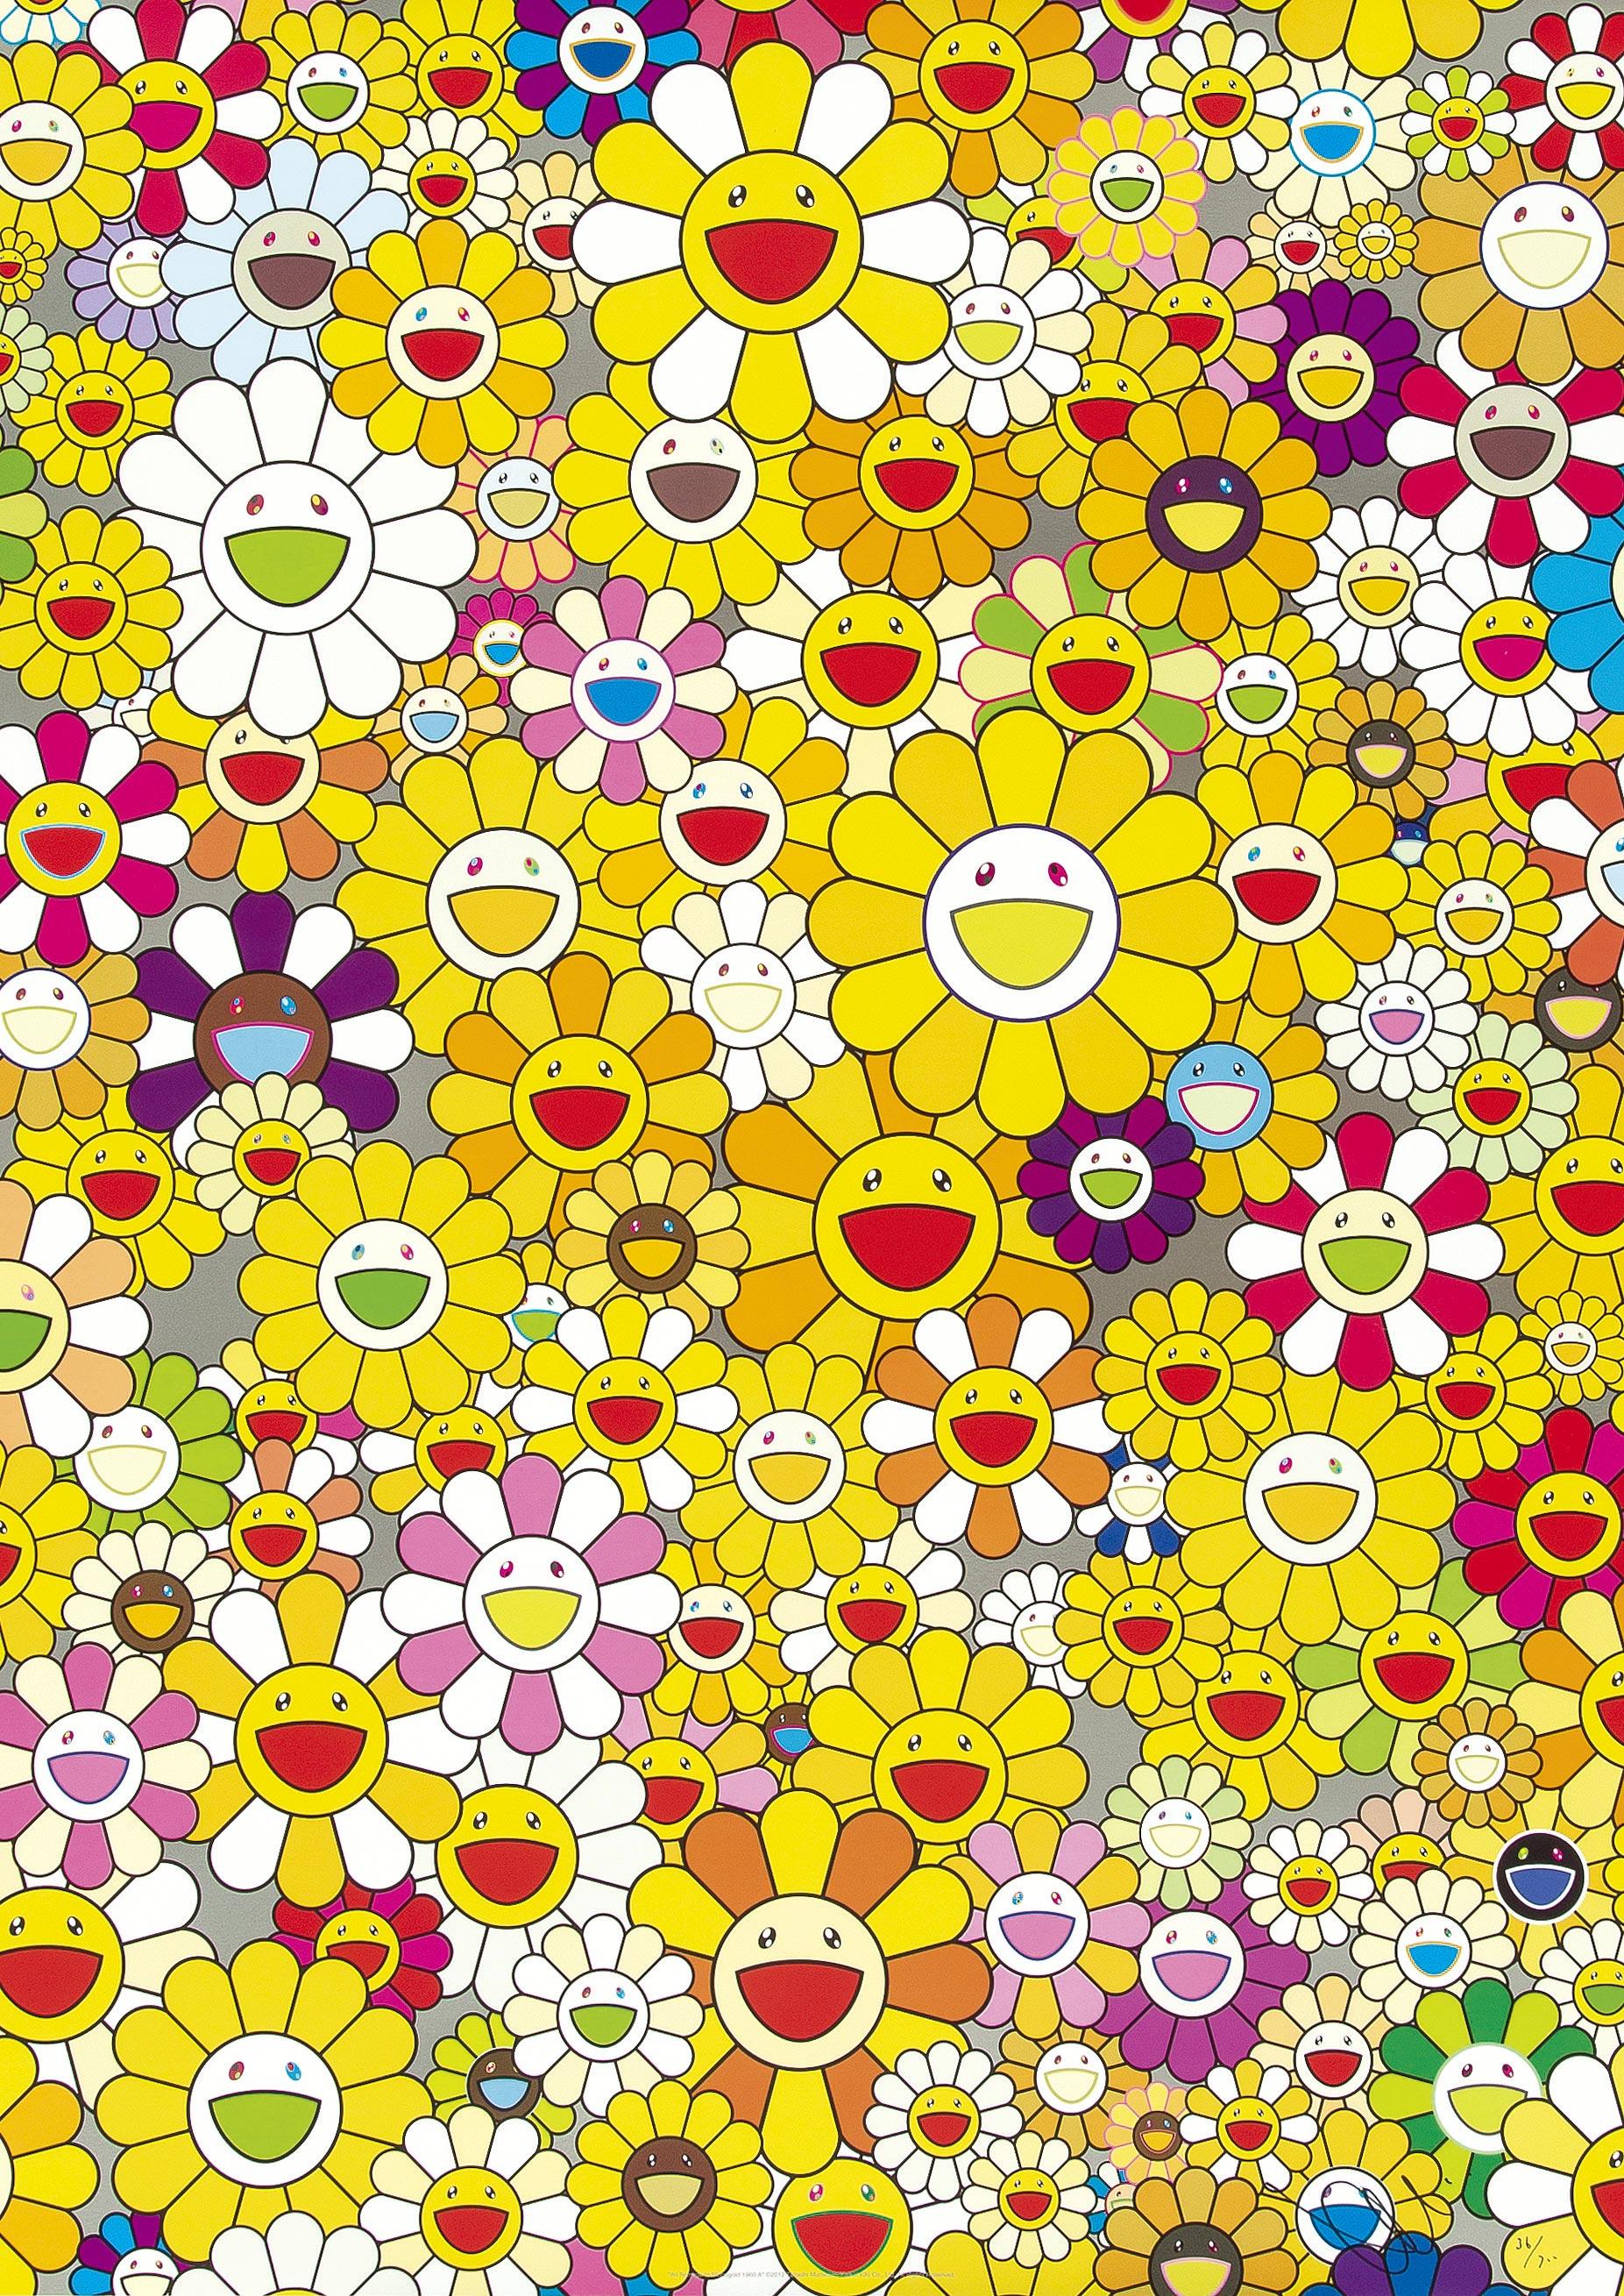 An Homage to Monogold, 1960A, 2012 by Takashi Murakami
Offset print, numbered and signed by the artist
27 1/10 × 20 9/10 in
68.8 × 53 cm
Edition  36/300

Takashi Murakami is best known for his contemporary combination of fine art and pop culture. He